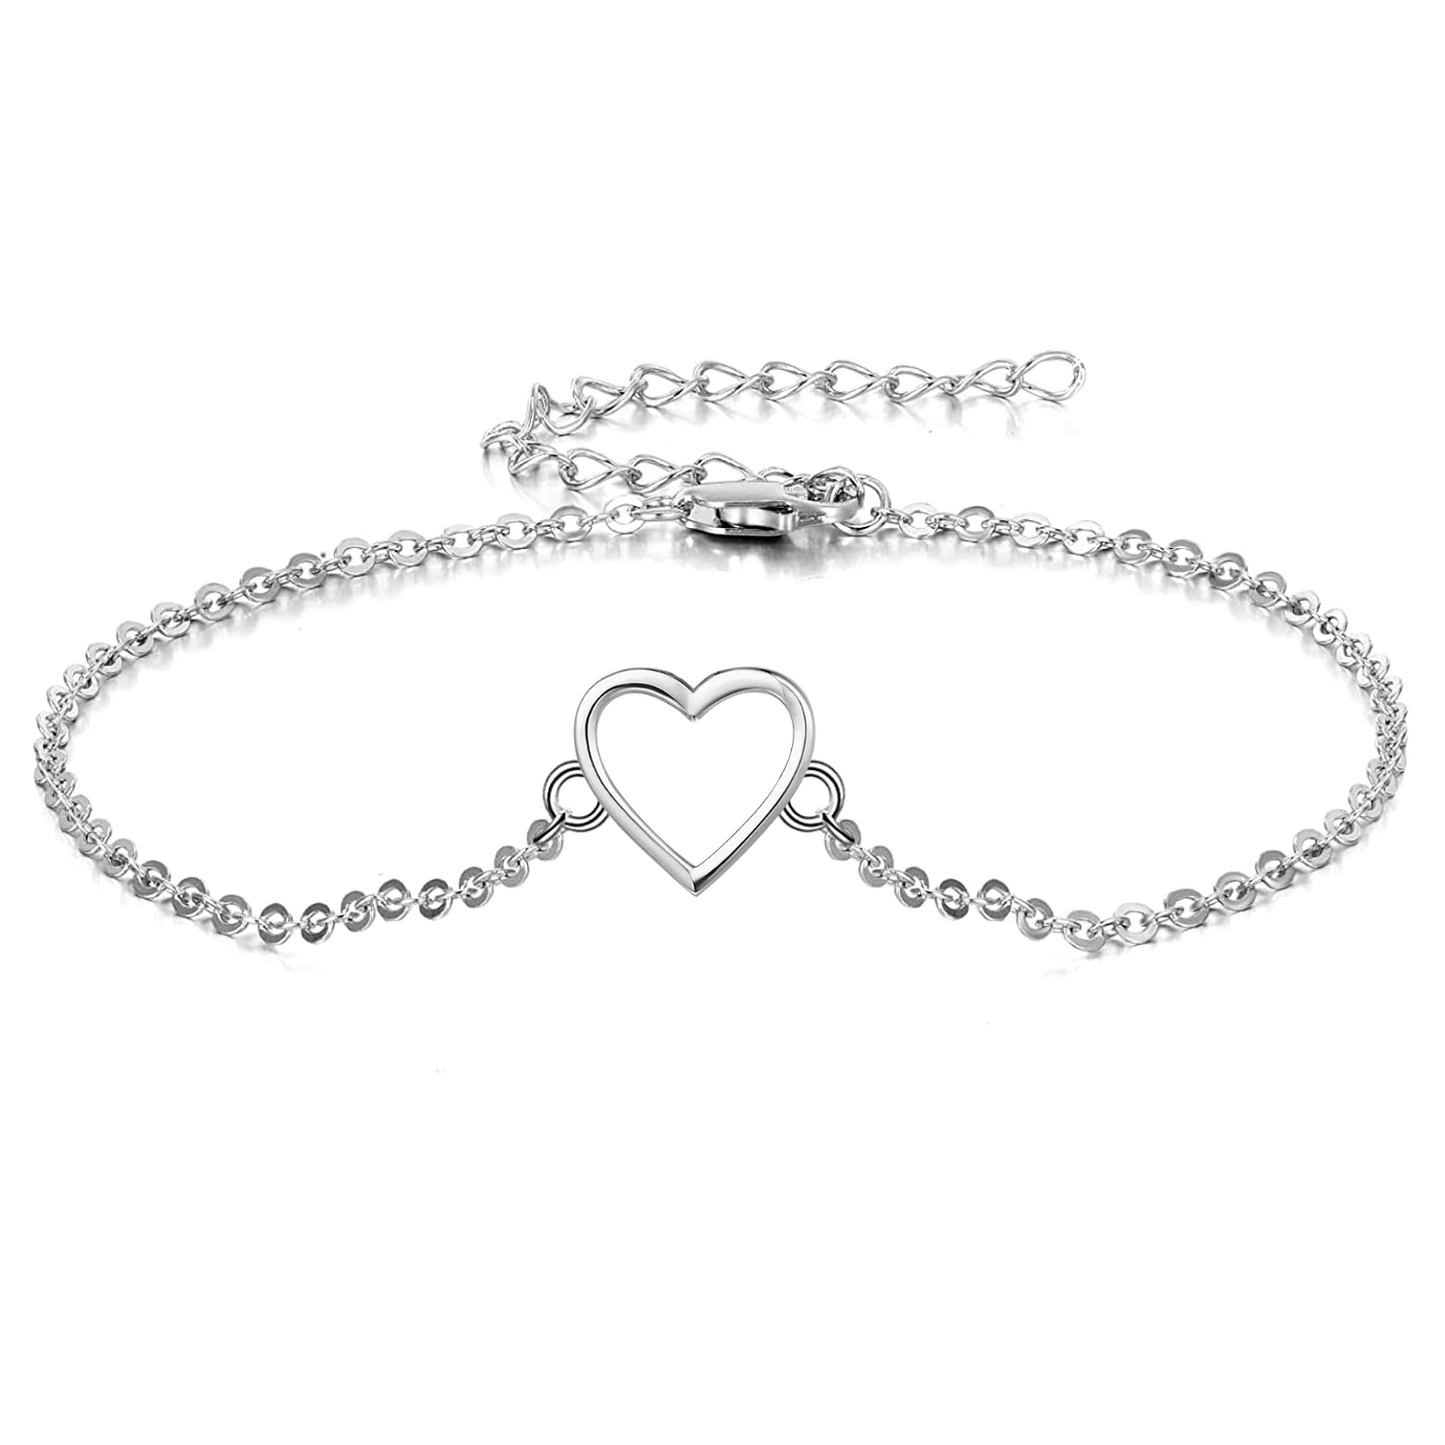 Silver Anklet - Heart Anklet for women and girls in 92.5 Silver